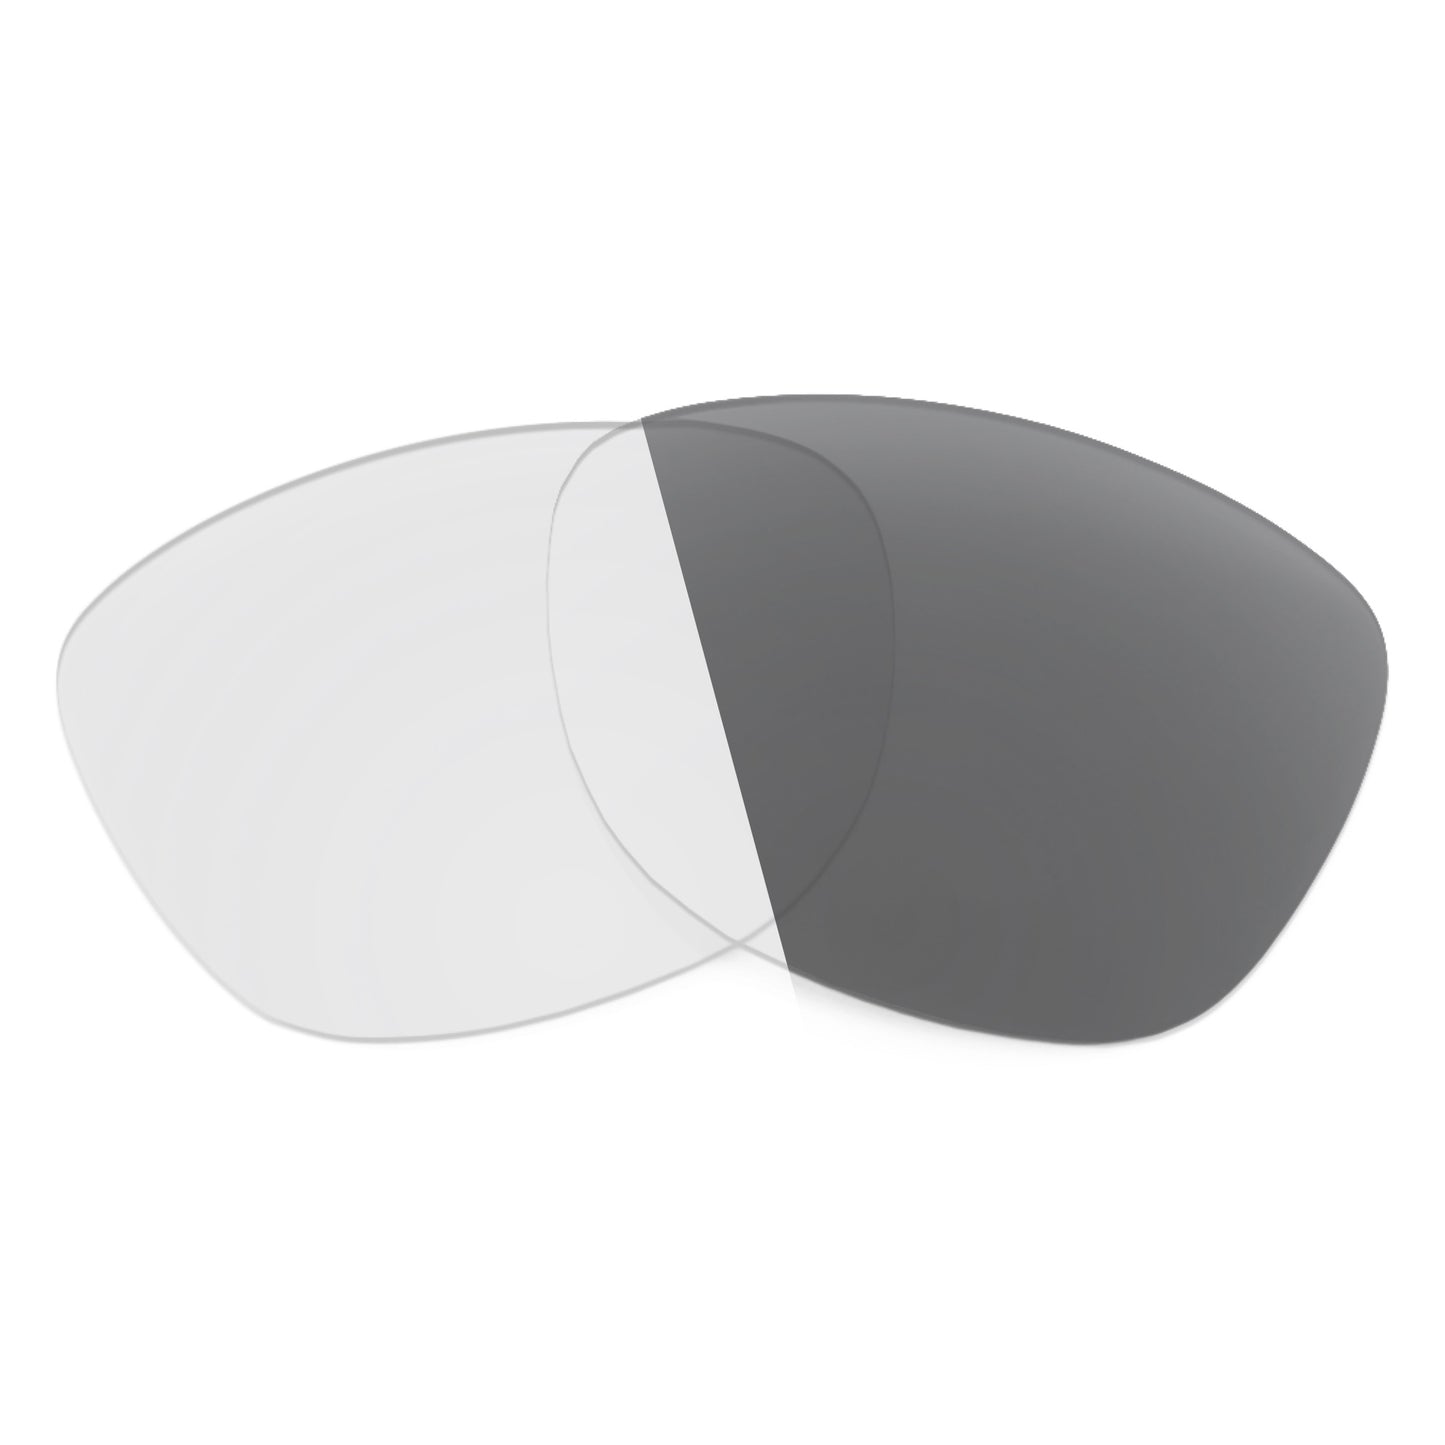 Revant replacement lenses for Maui Jim Cathedrals MJ782 Non-Polarized Adapt Gray Photochromic